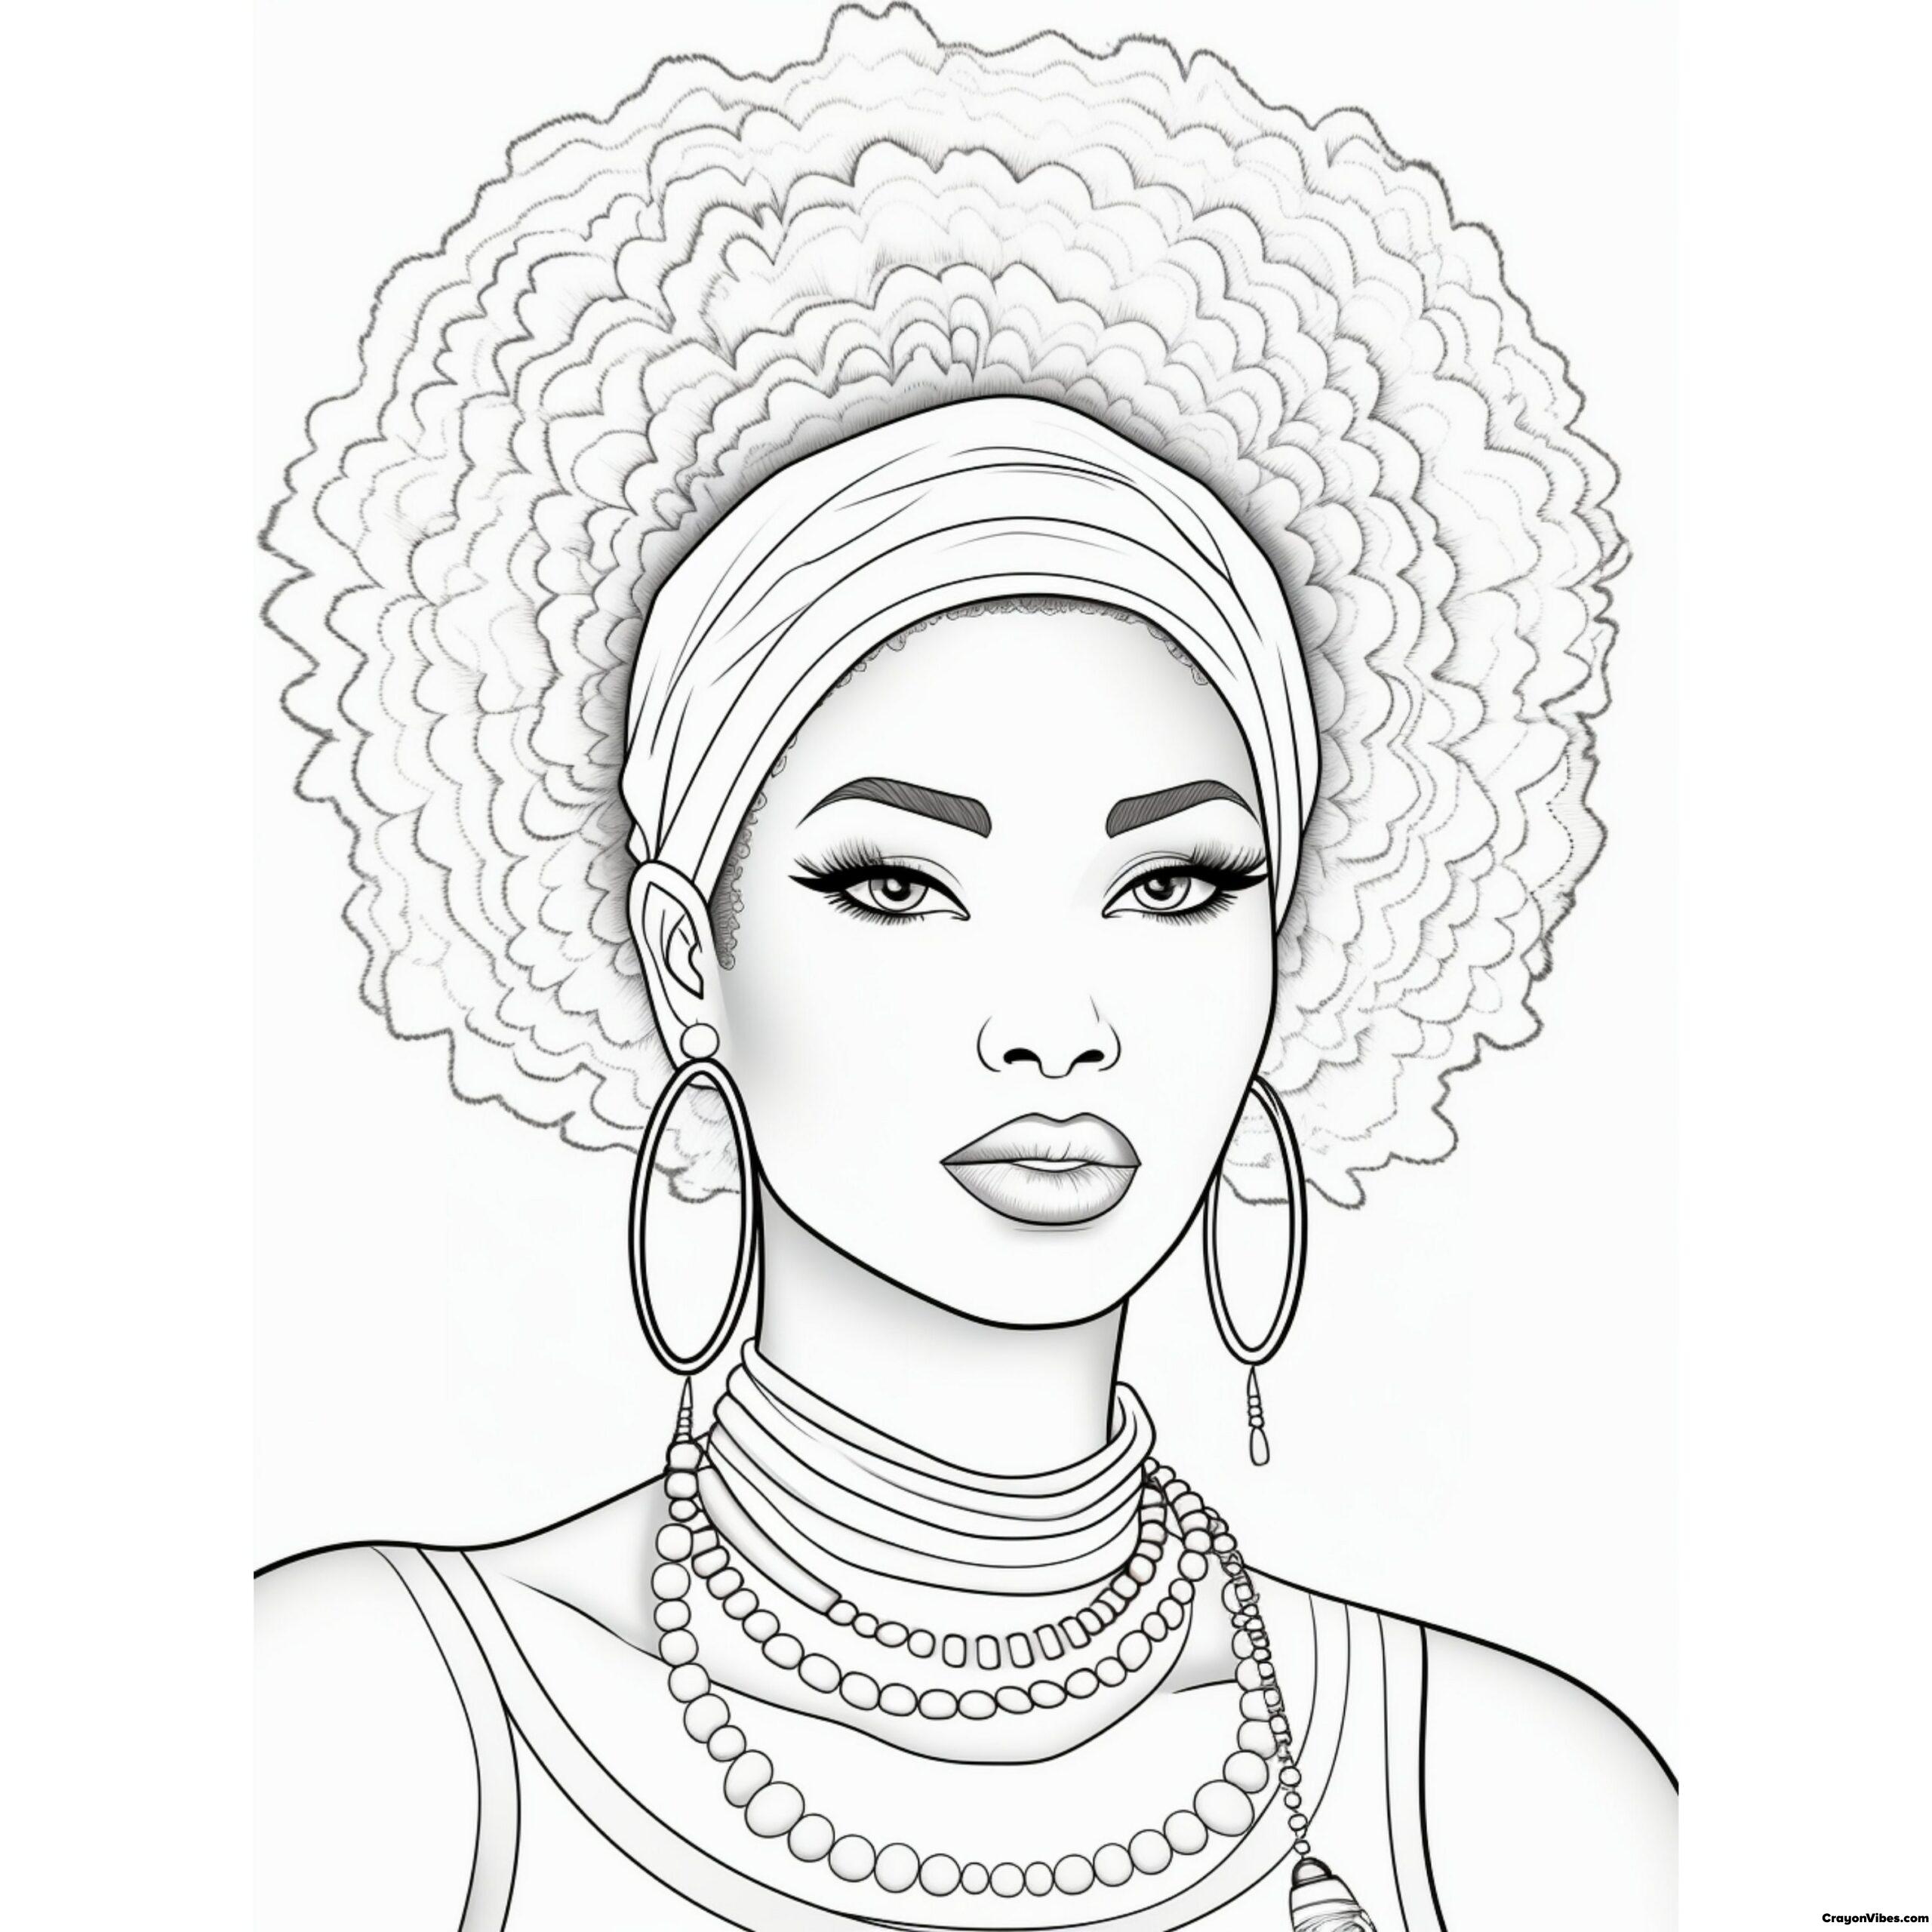 16 Black Girl Coloring Pages Free Printable for Adults